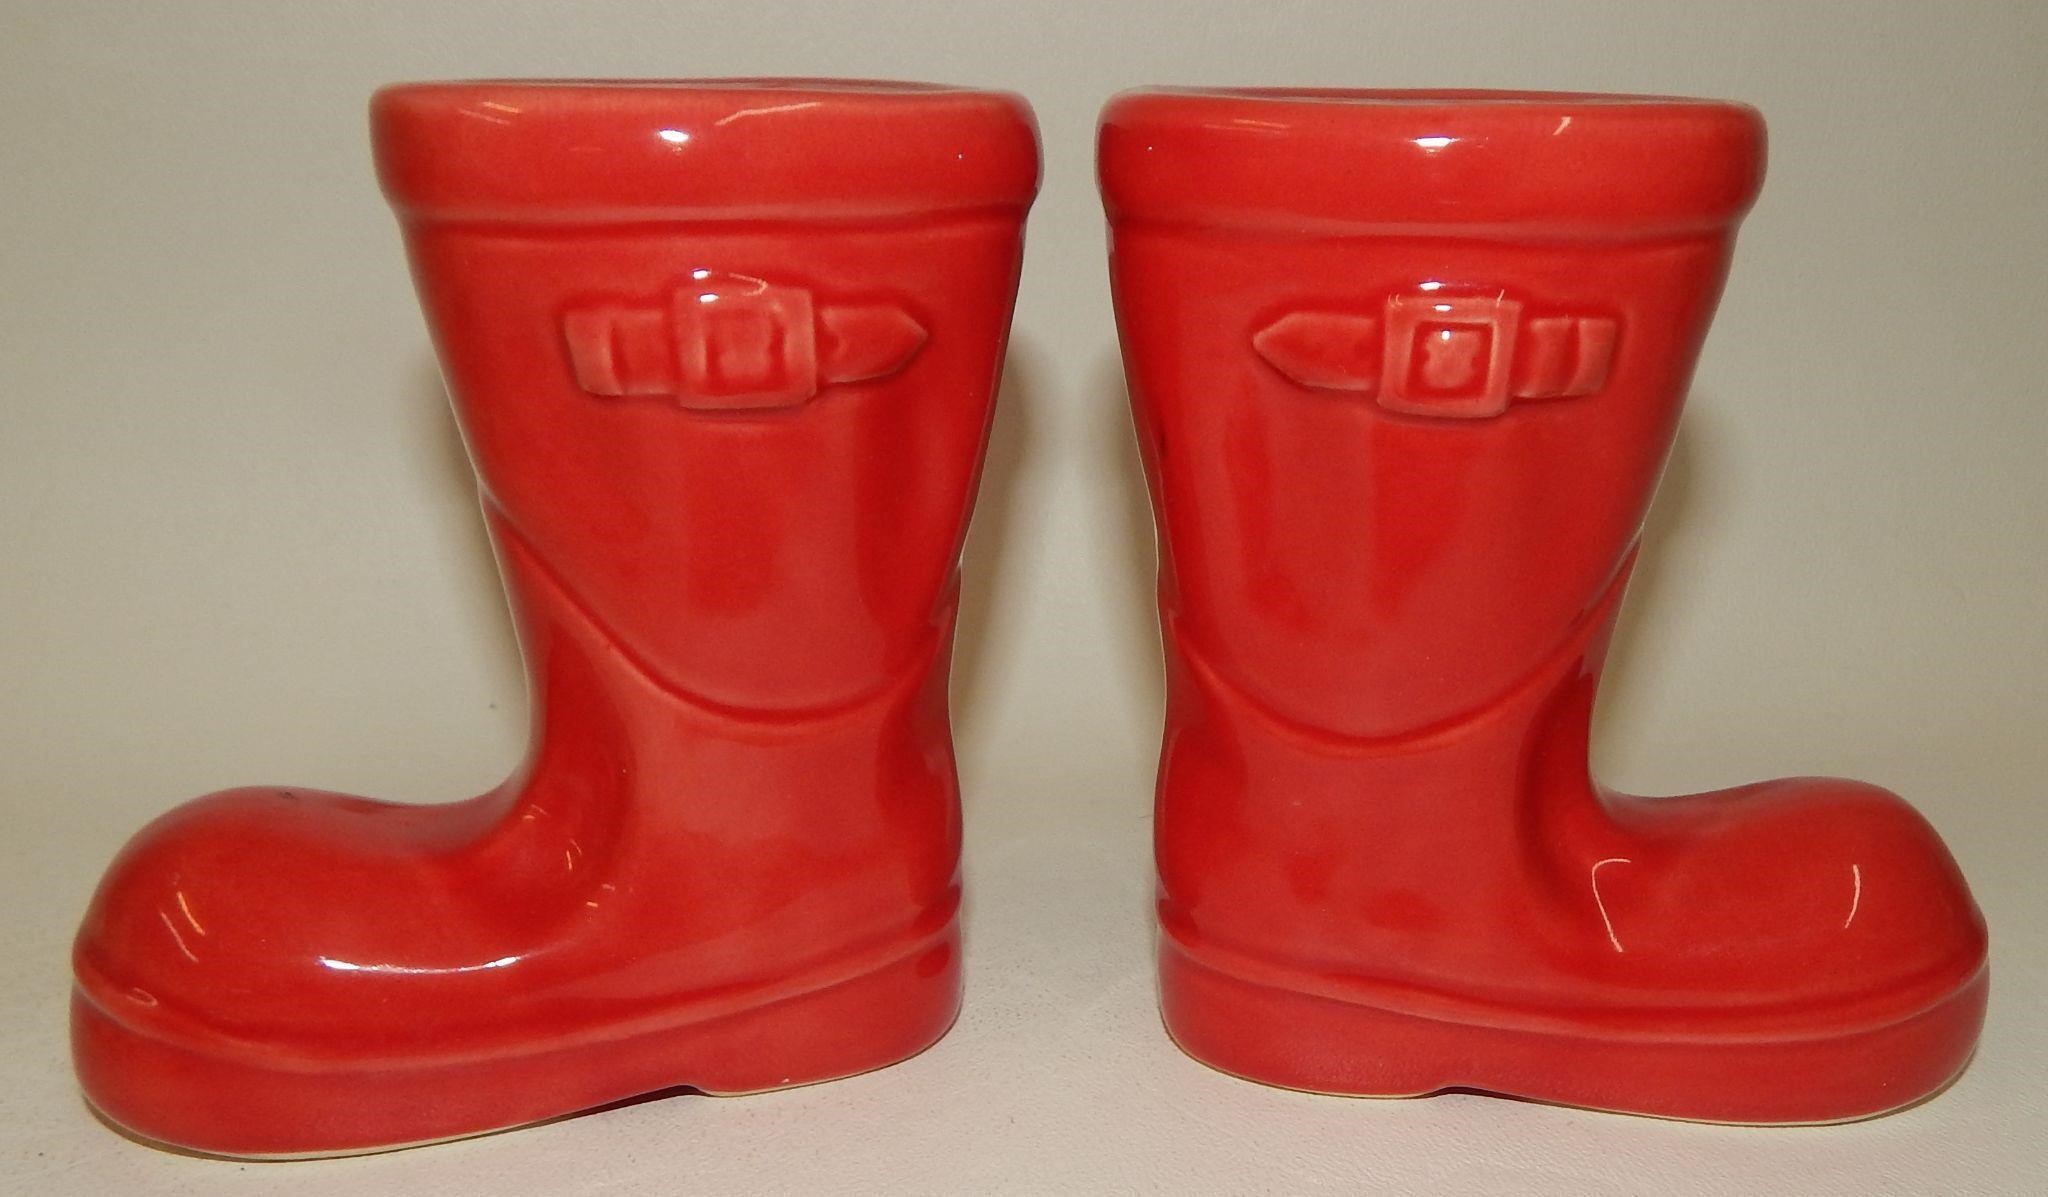 Large Red Rain Garden Boots Galoshes